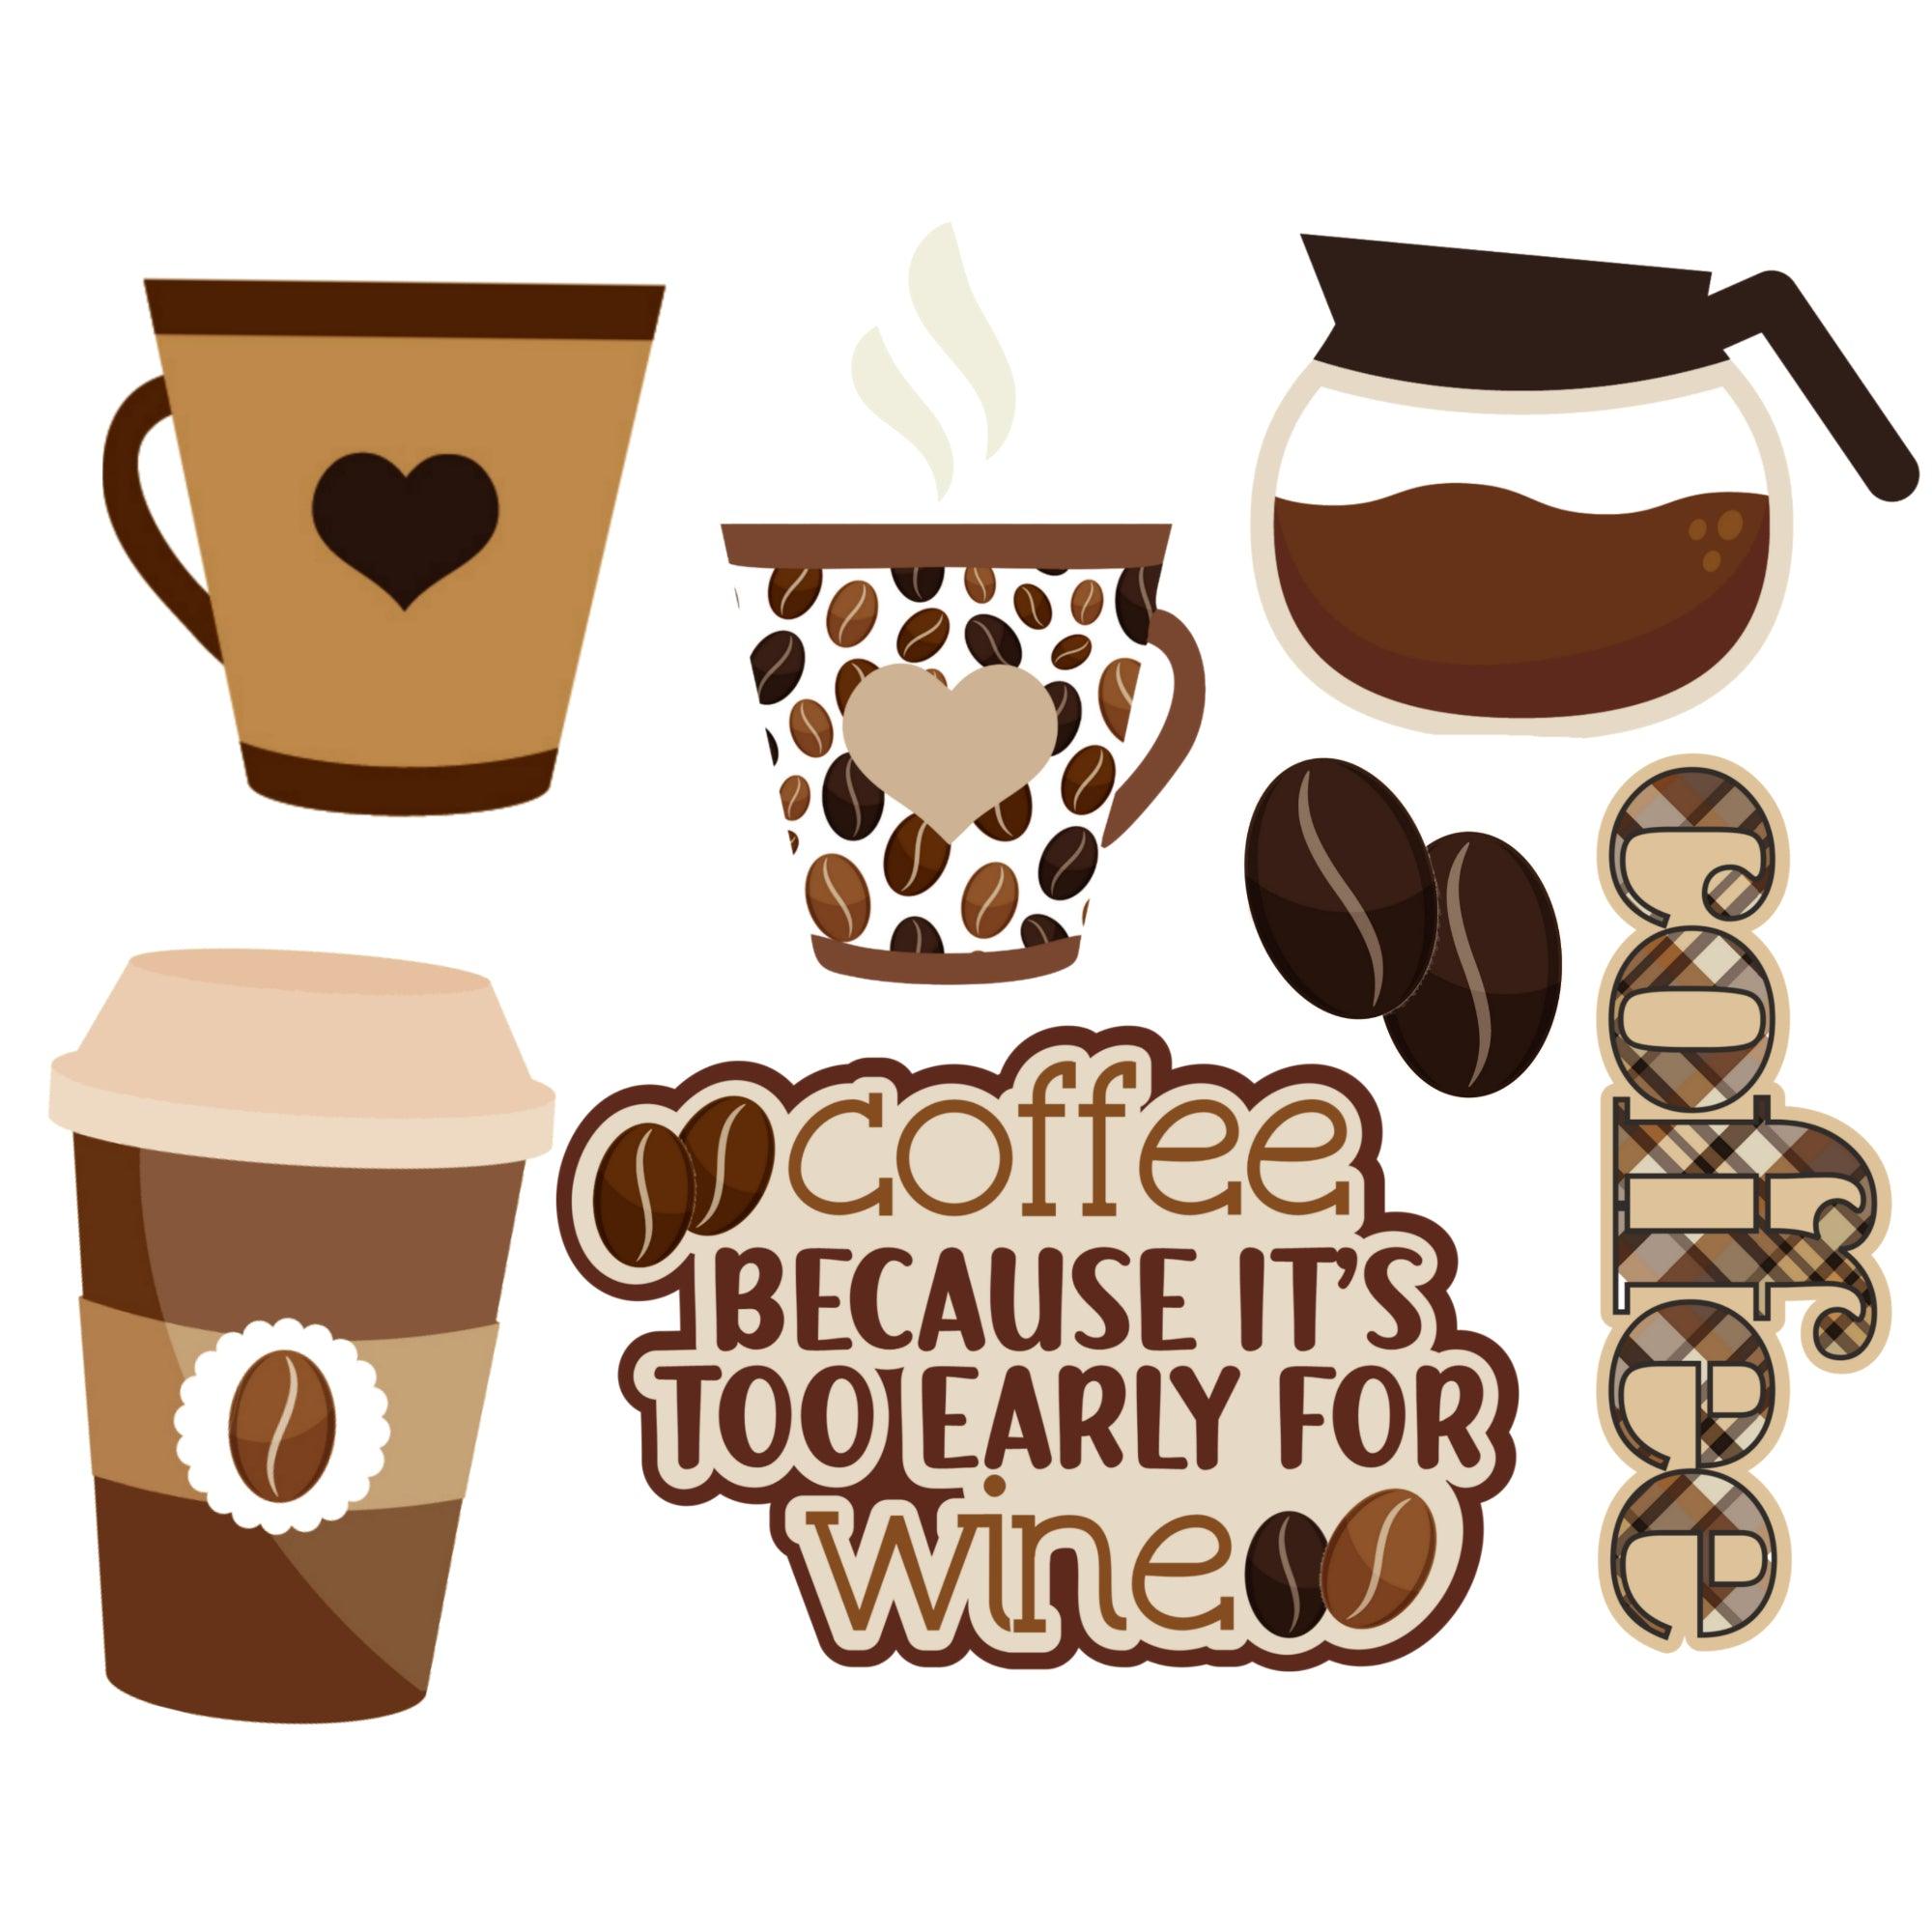 Coffee Lover Collection 12 x 12 Scrapbook Paper & Embellishment Kit by SSC Designs - Scrapbook Supply Companies